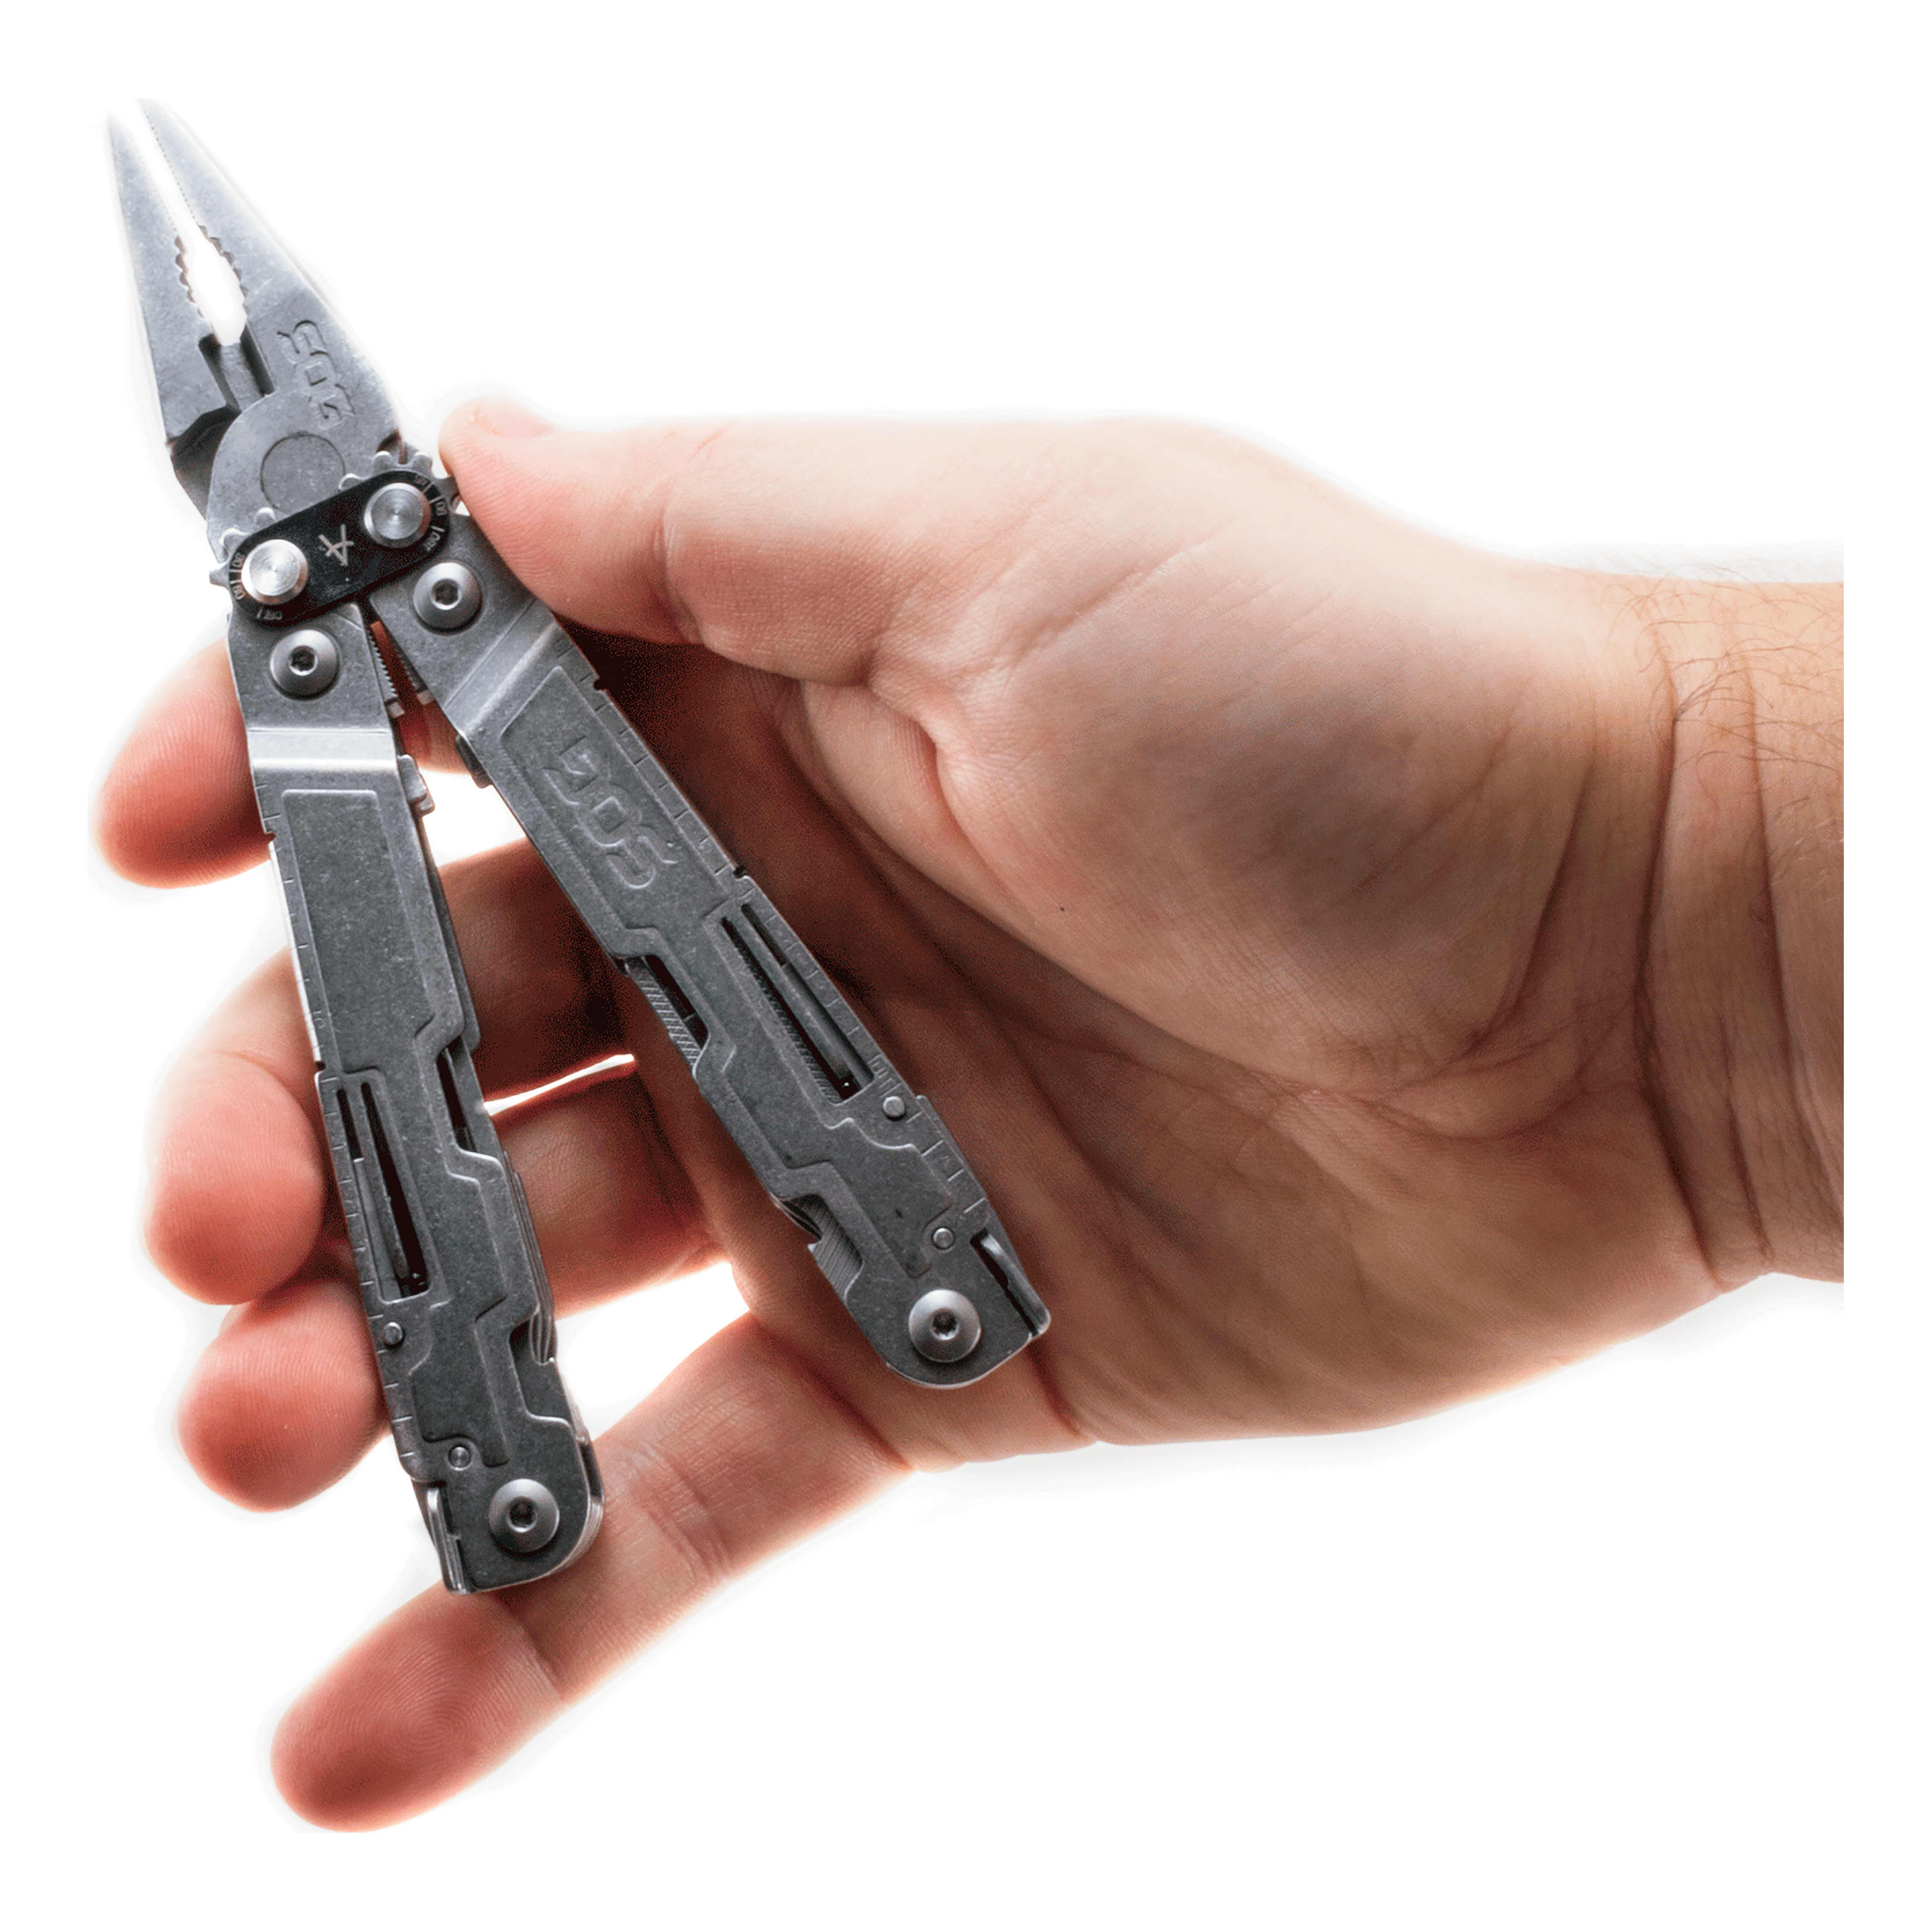 SOG® PowerAccess Multitool - In the Field